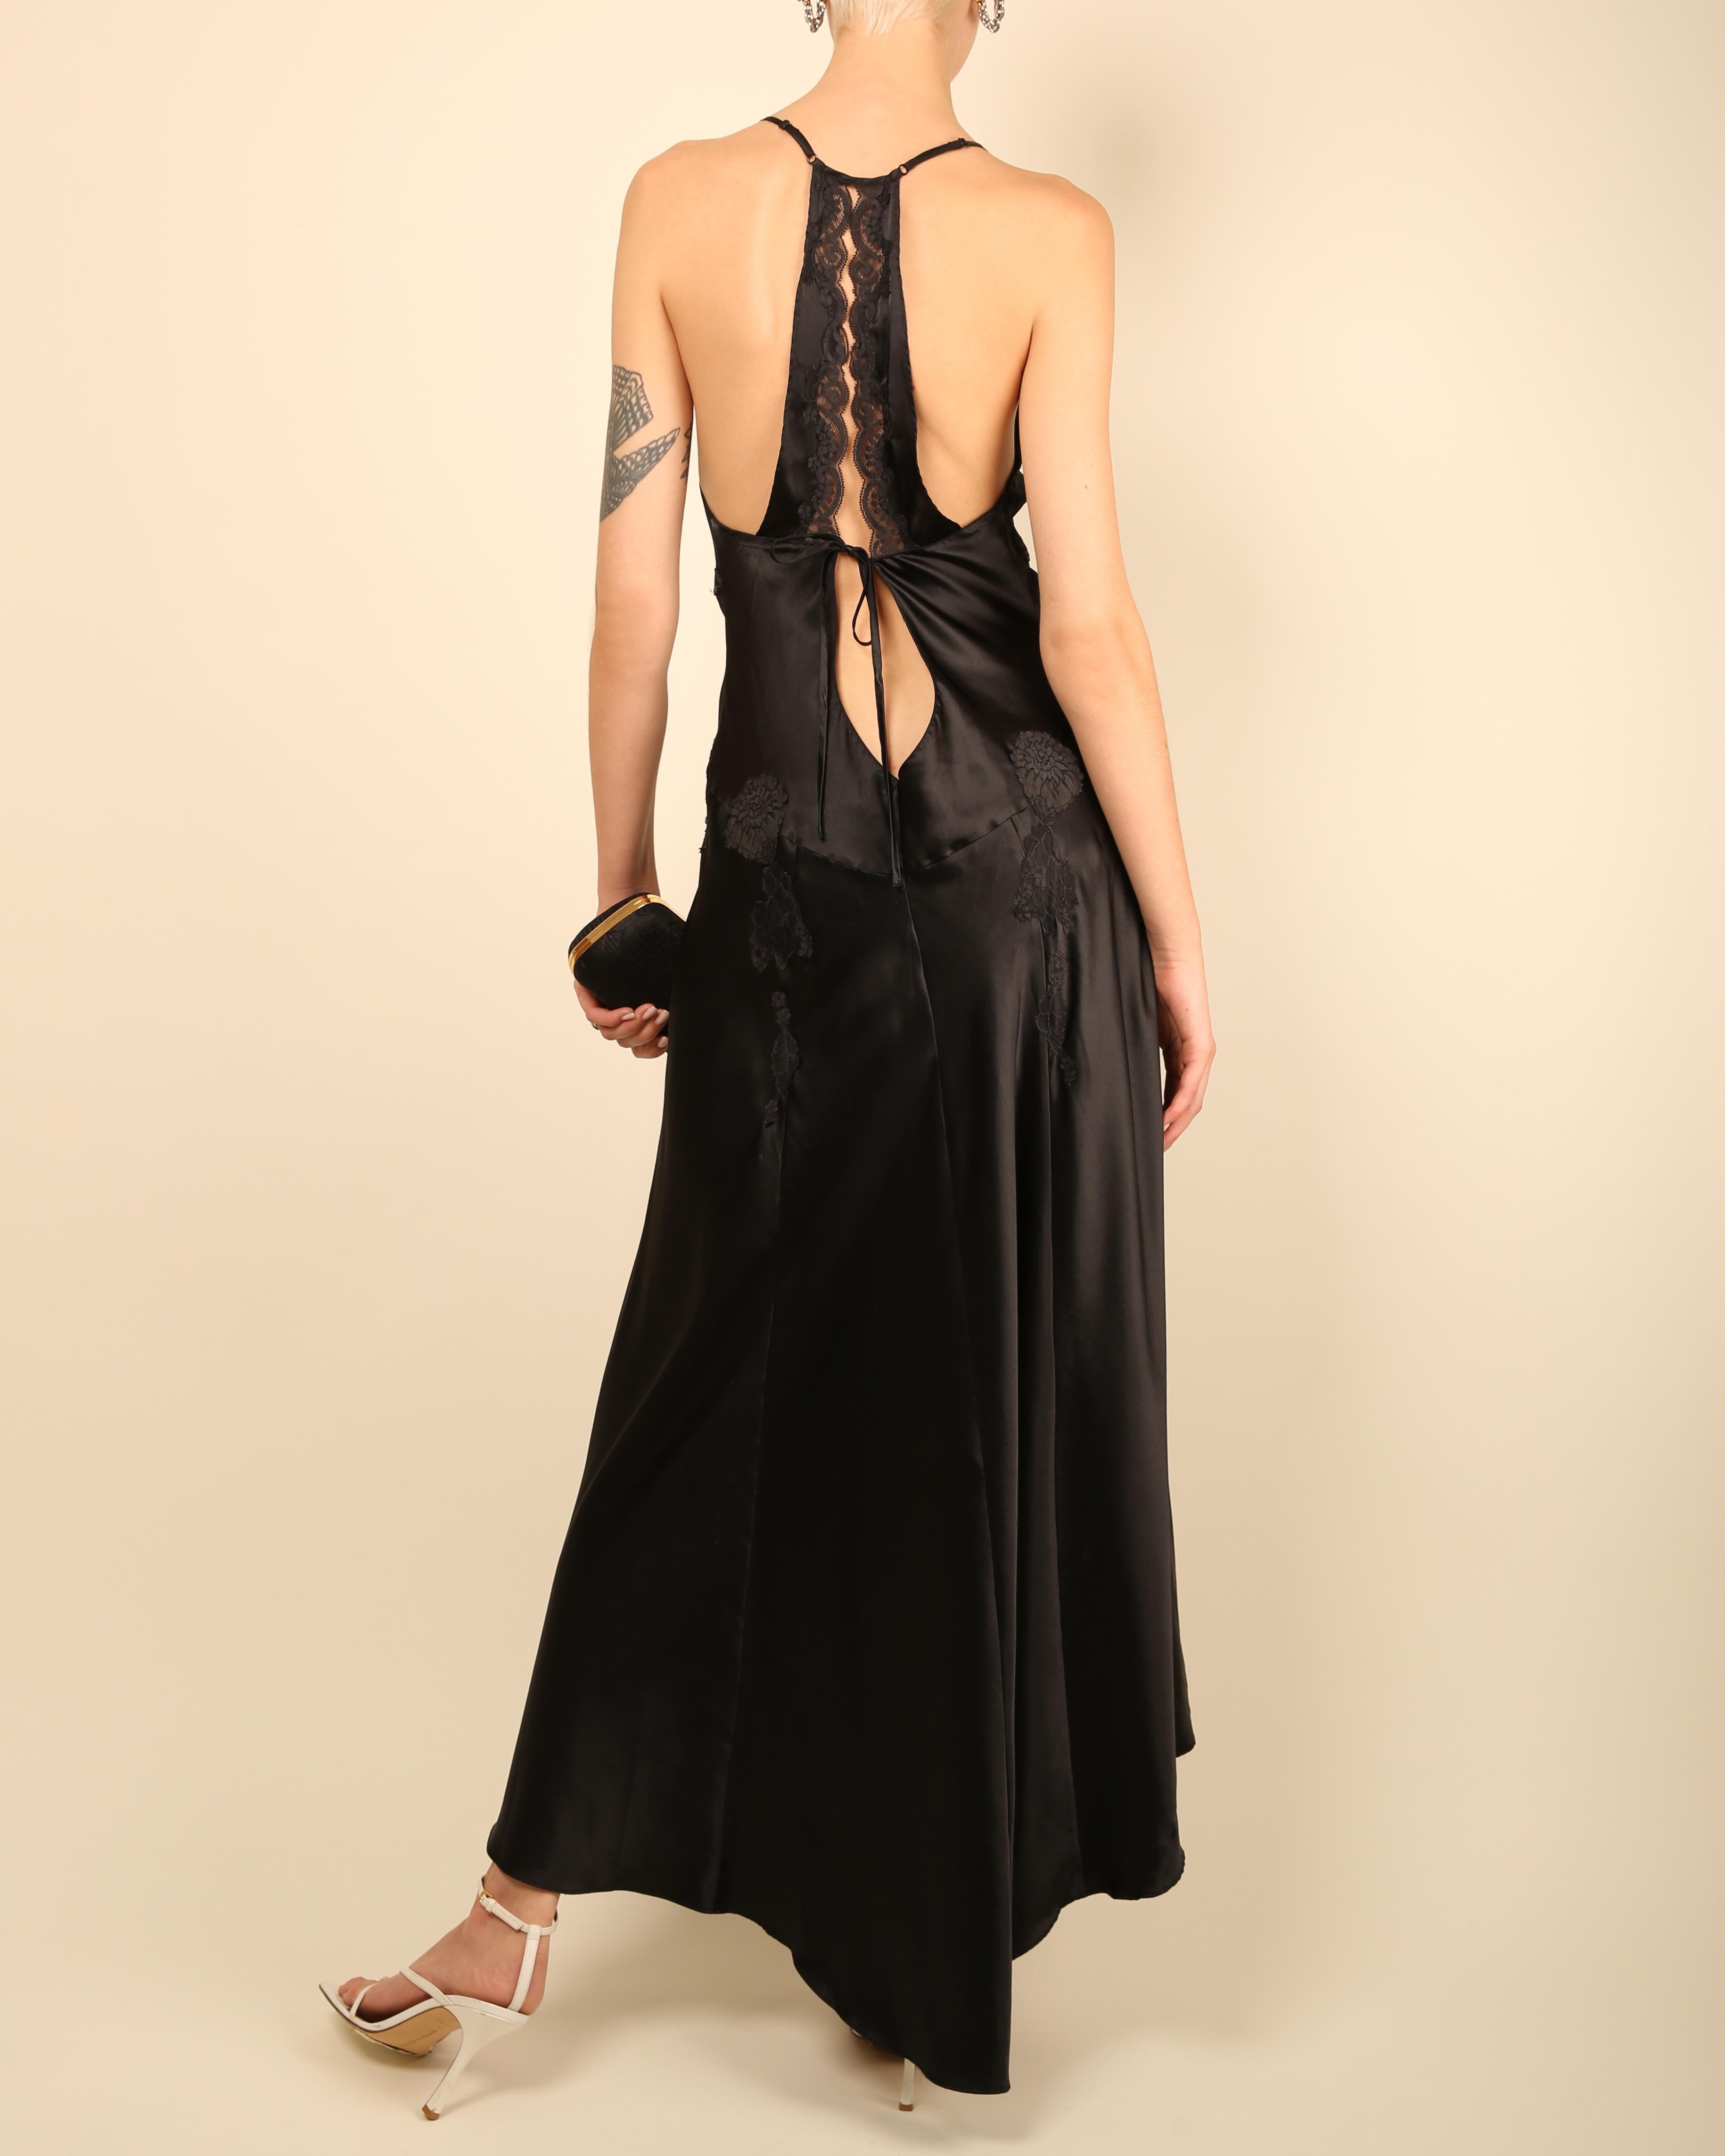 Vintage black satin silk lace plunging backless night gown slip maxi dress M For Sale 1